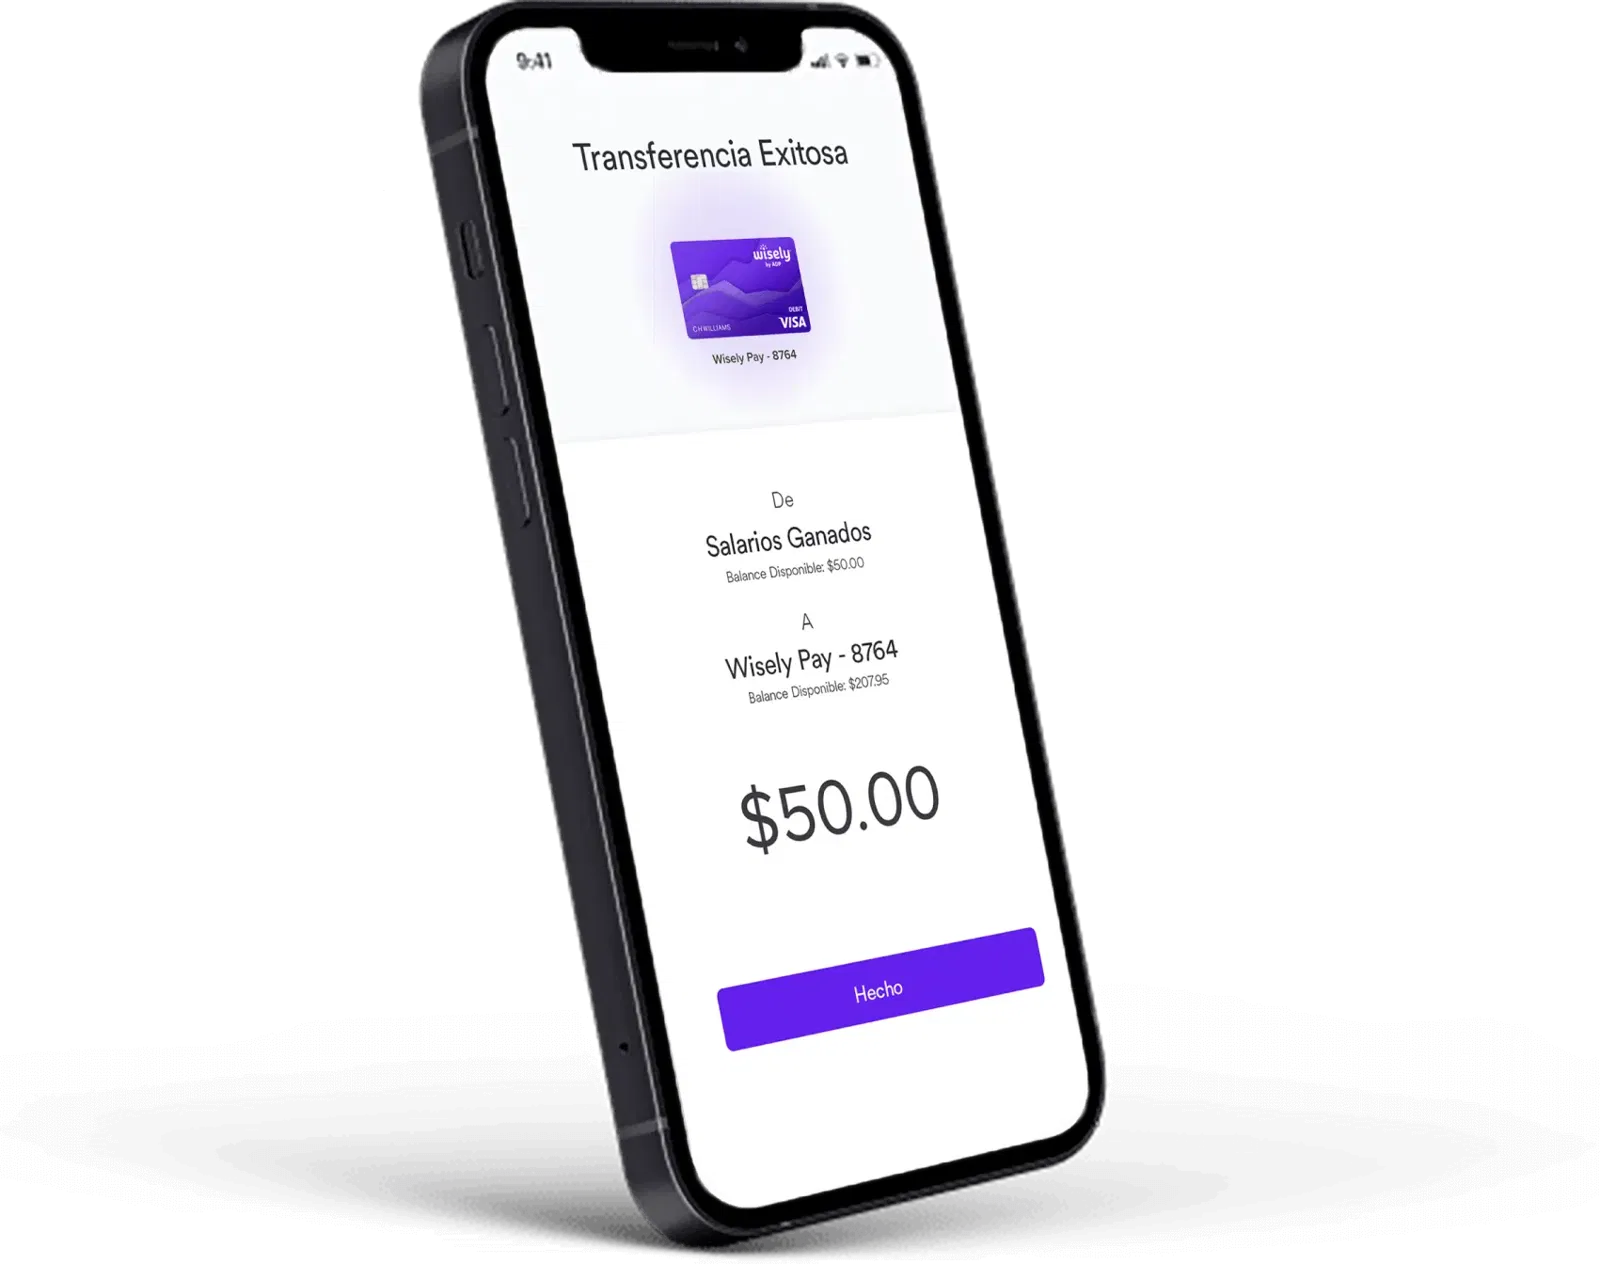 Image of a smartphone displaying a successful transaction screen in Spanish for a $50 transfer from "Salarios Ganados" to "Wisely Pay - 8764" with a purple "Hecho" button at the bottom.